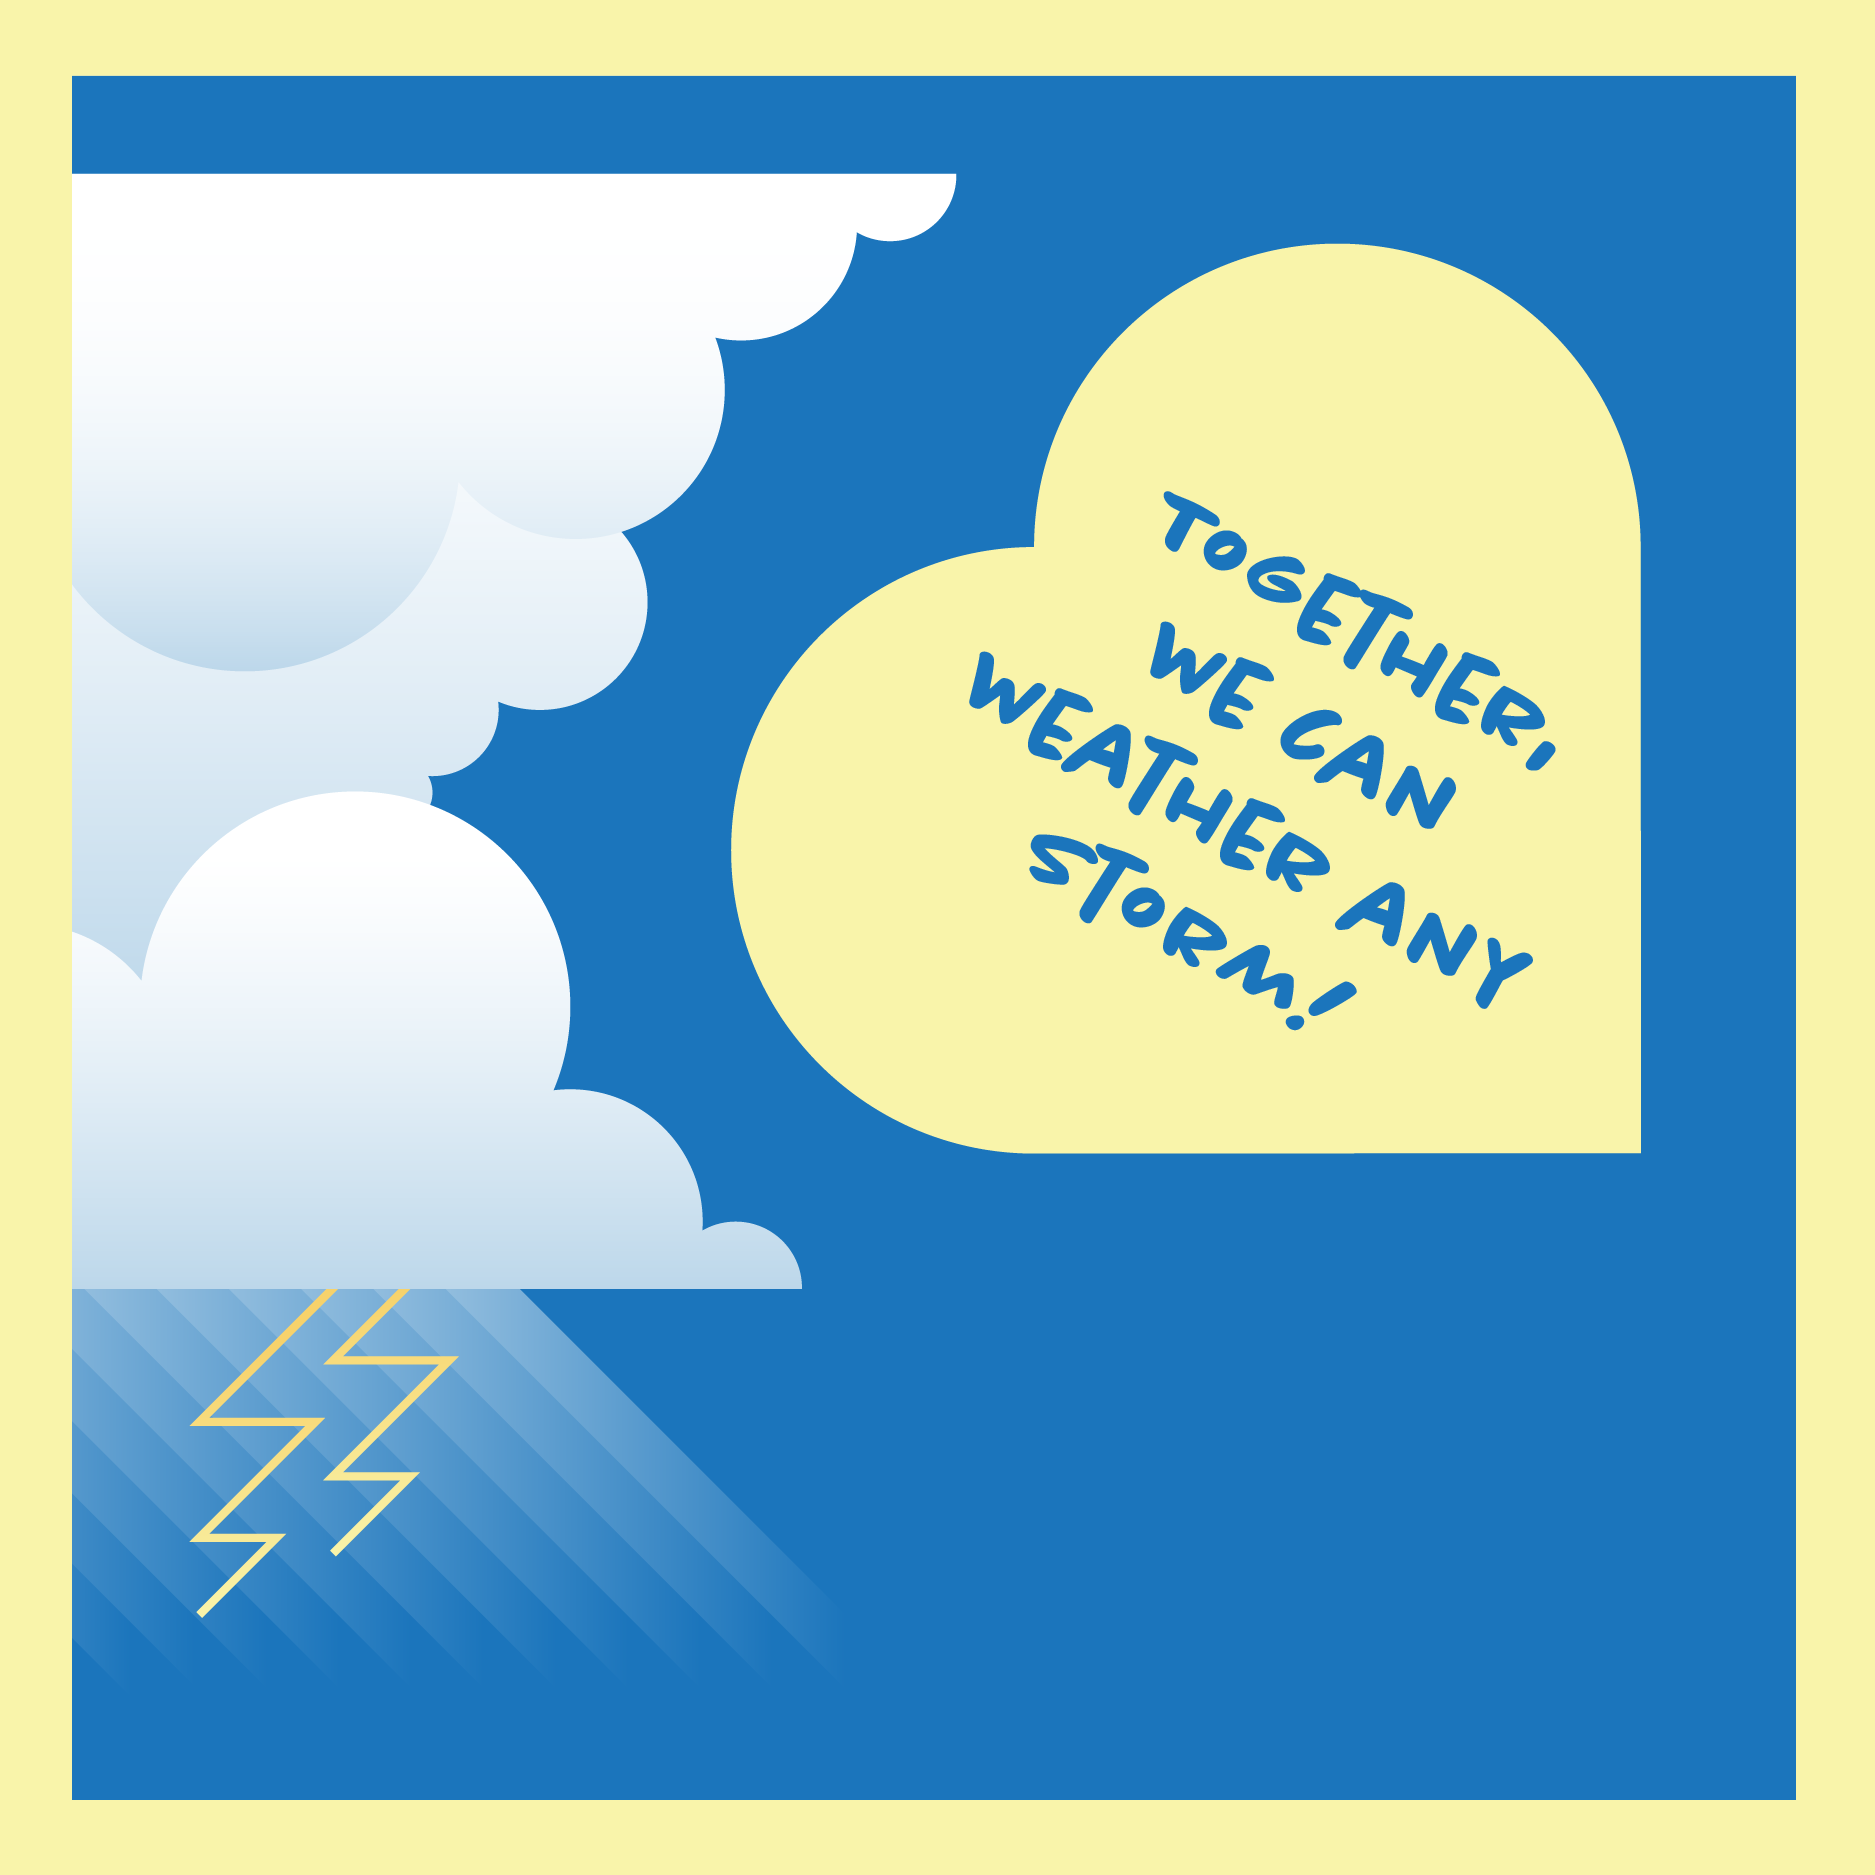 "Together, we can weather any storm!" with an image of a storm cloud, lightning and rain.